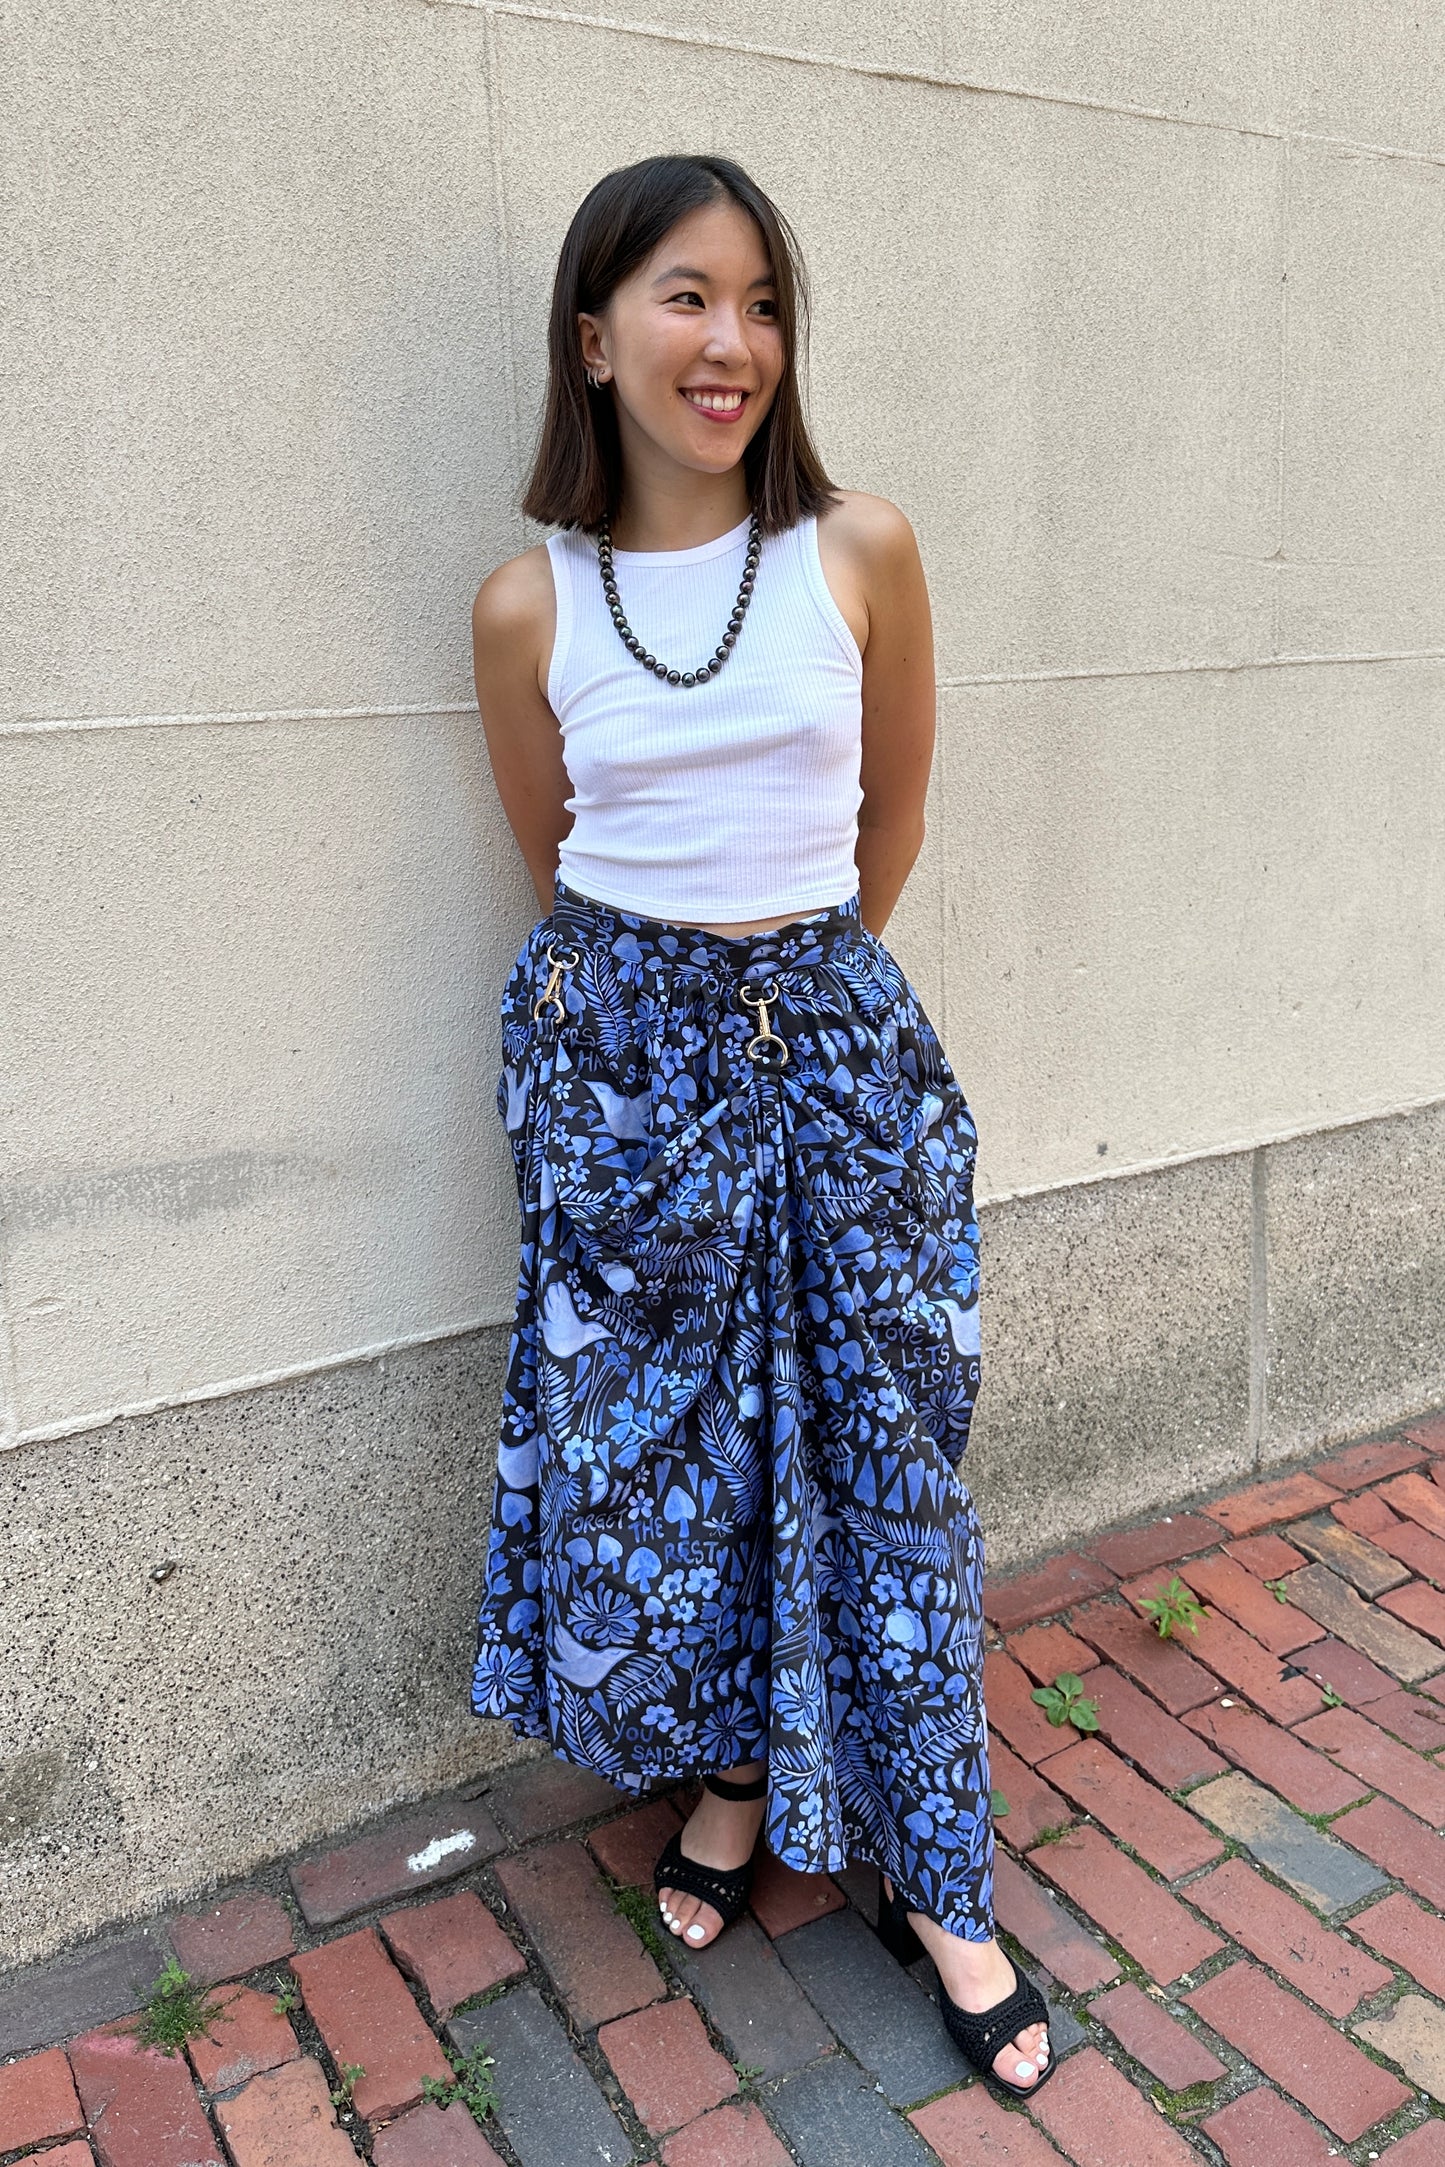 Dauphinette - Hitched Skirt: Lazy Boy Floral